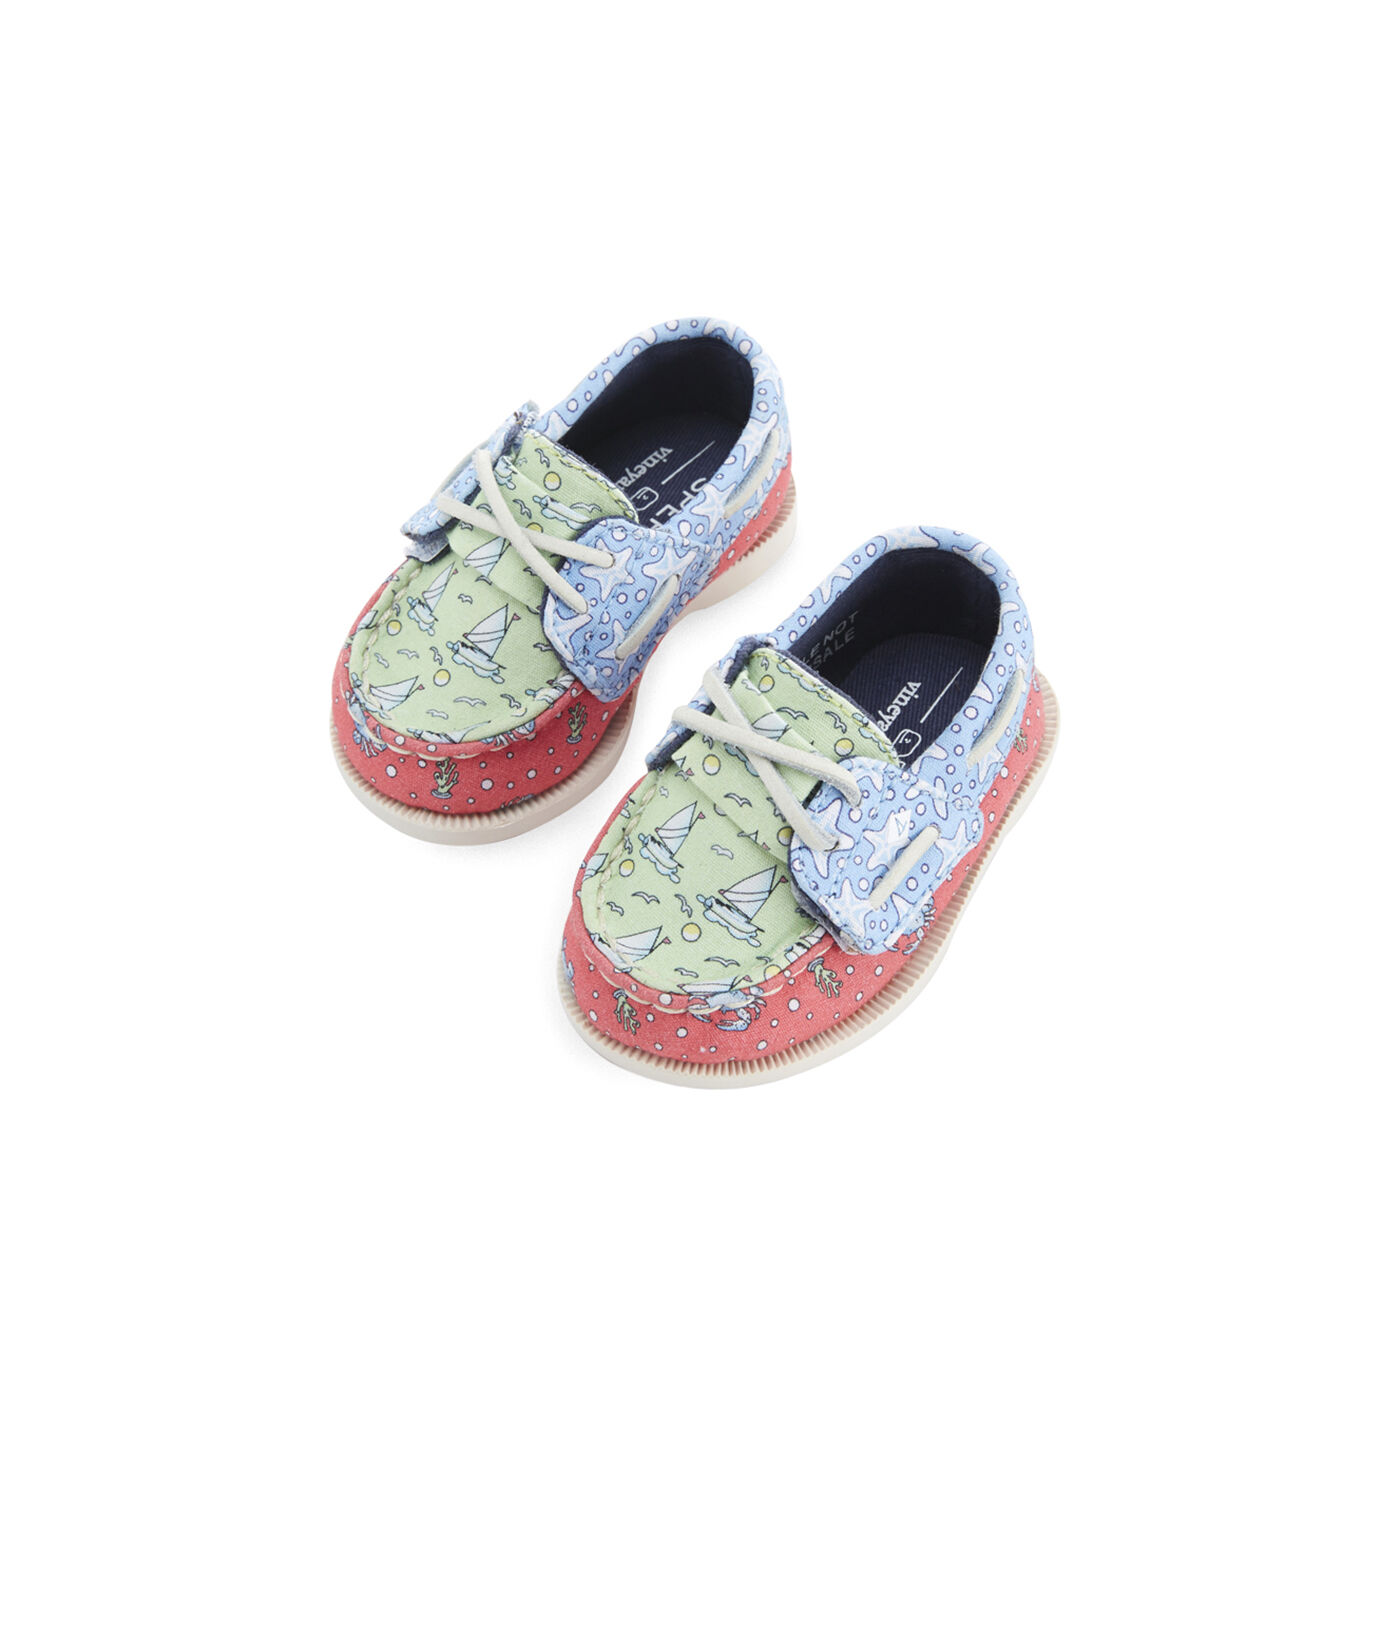 infant sperry crib shoes